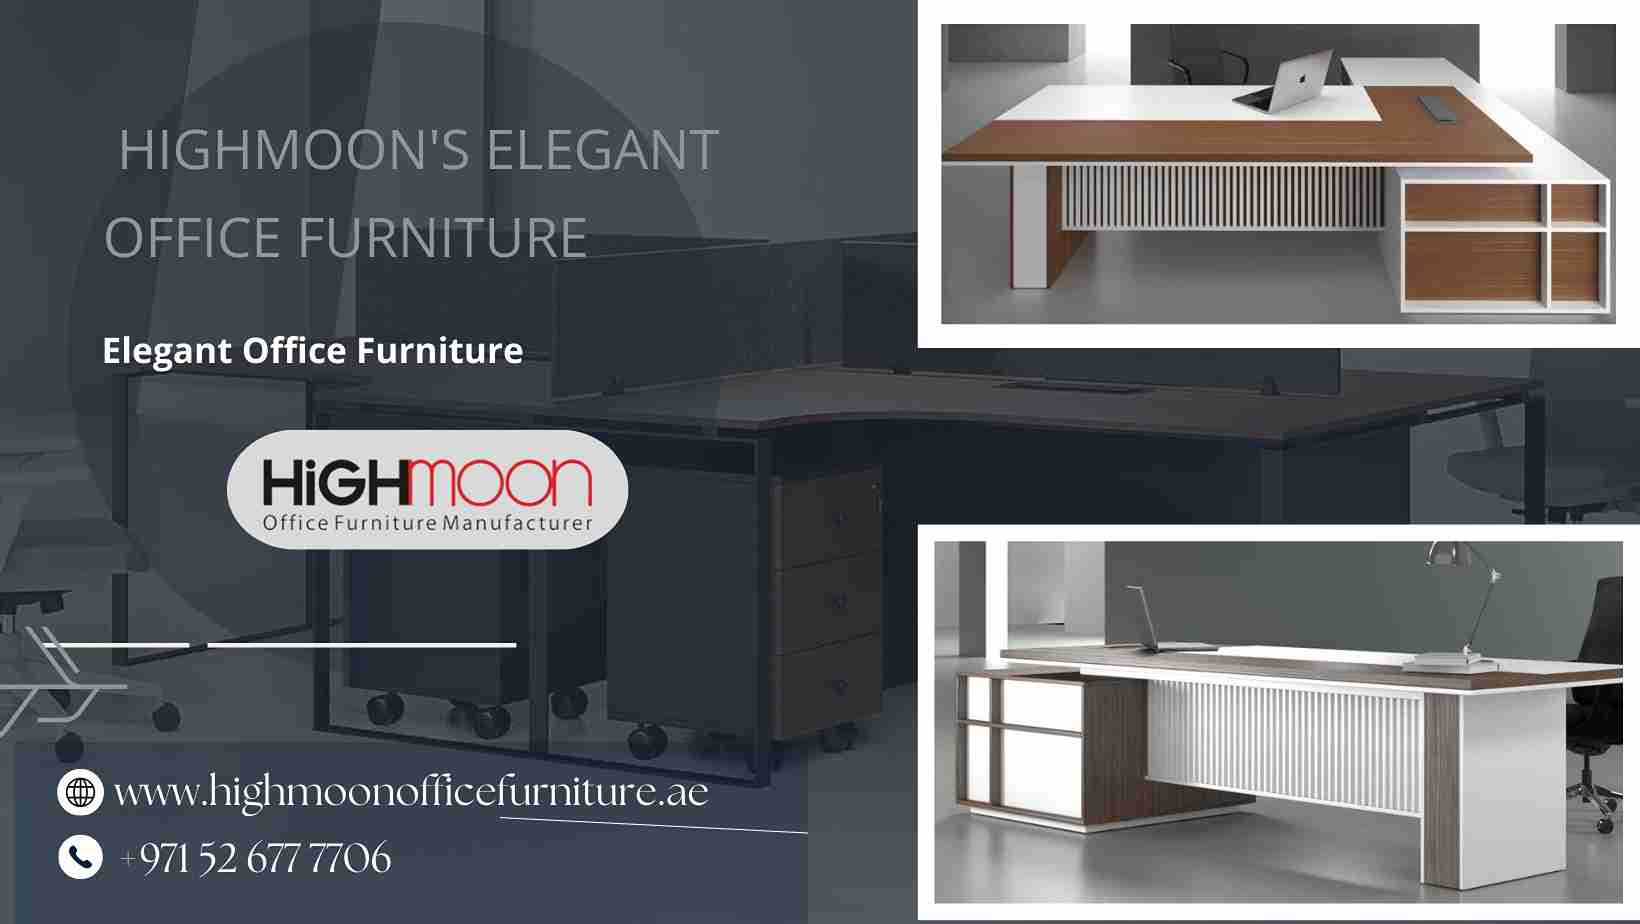 Avoid injuries & enjoy the efficacy with Highmoon’s elegant office furniture